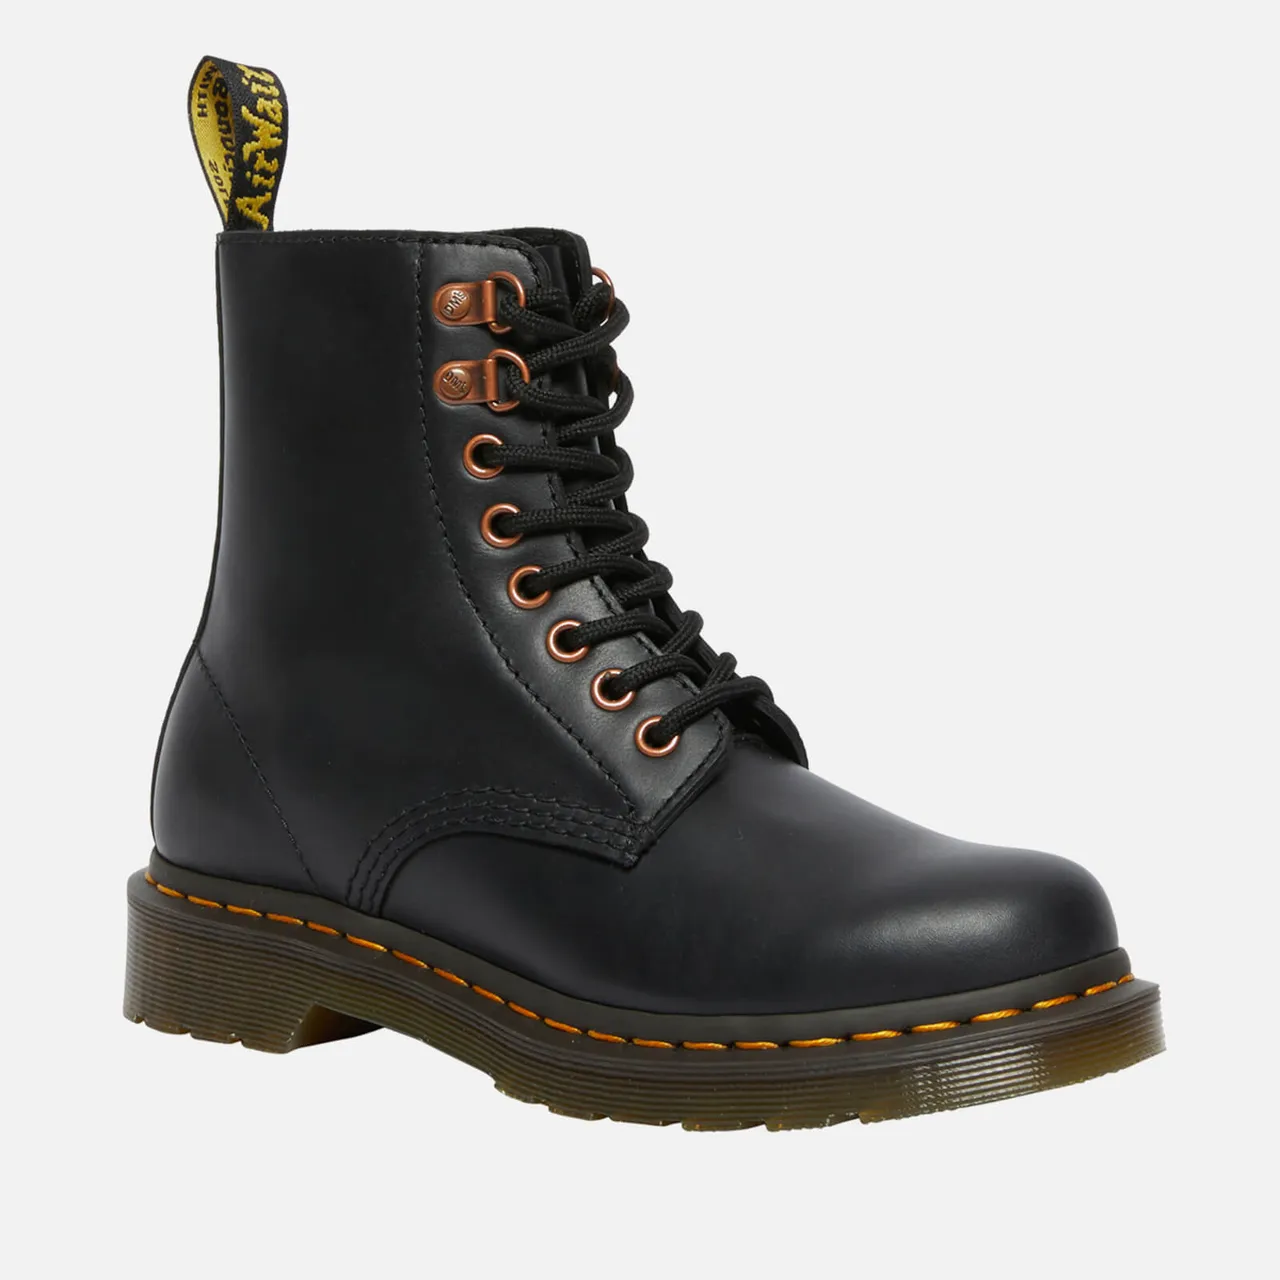 Dr. Martens Women's 1460 Wanama Leather Boots